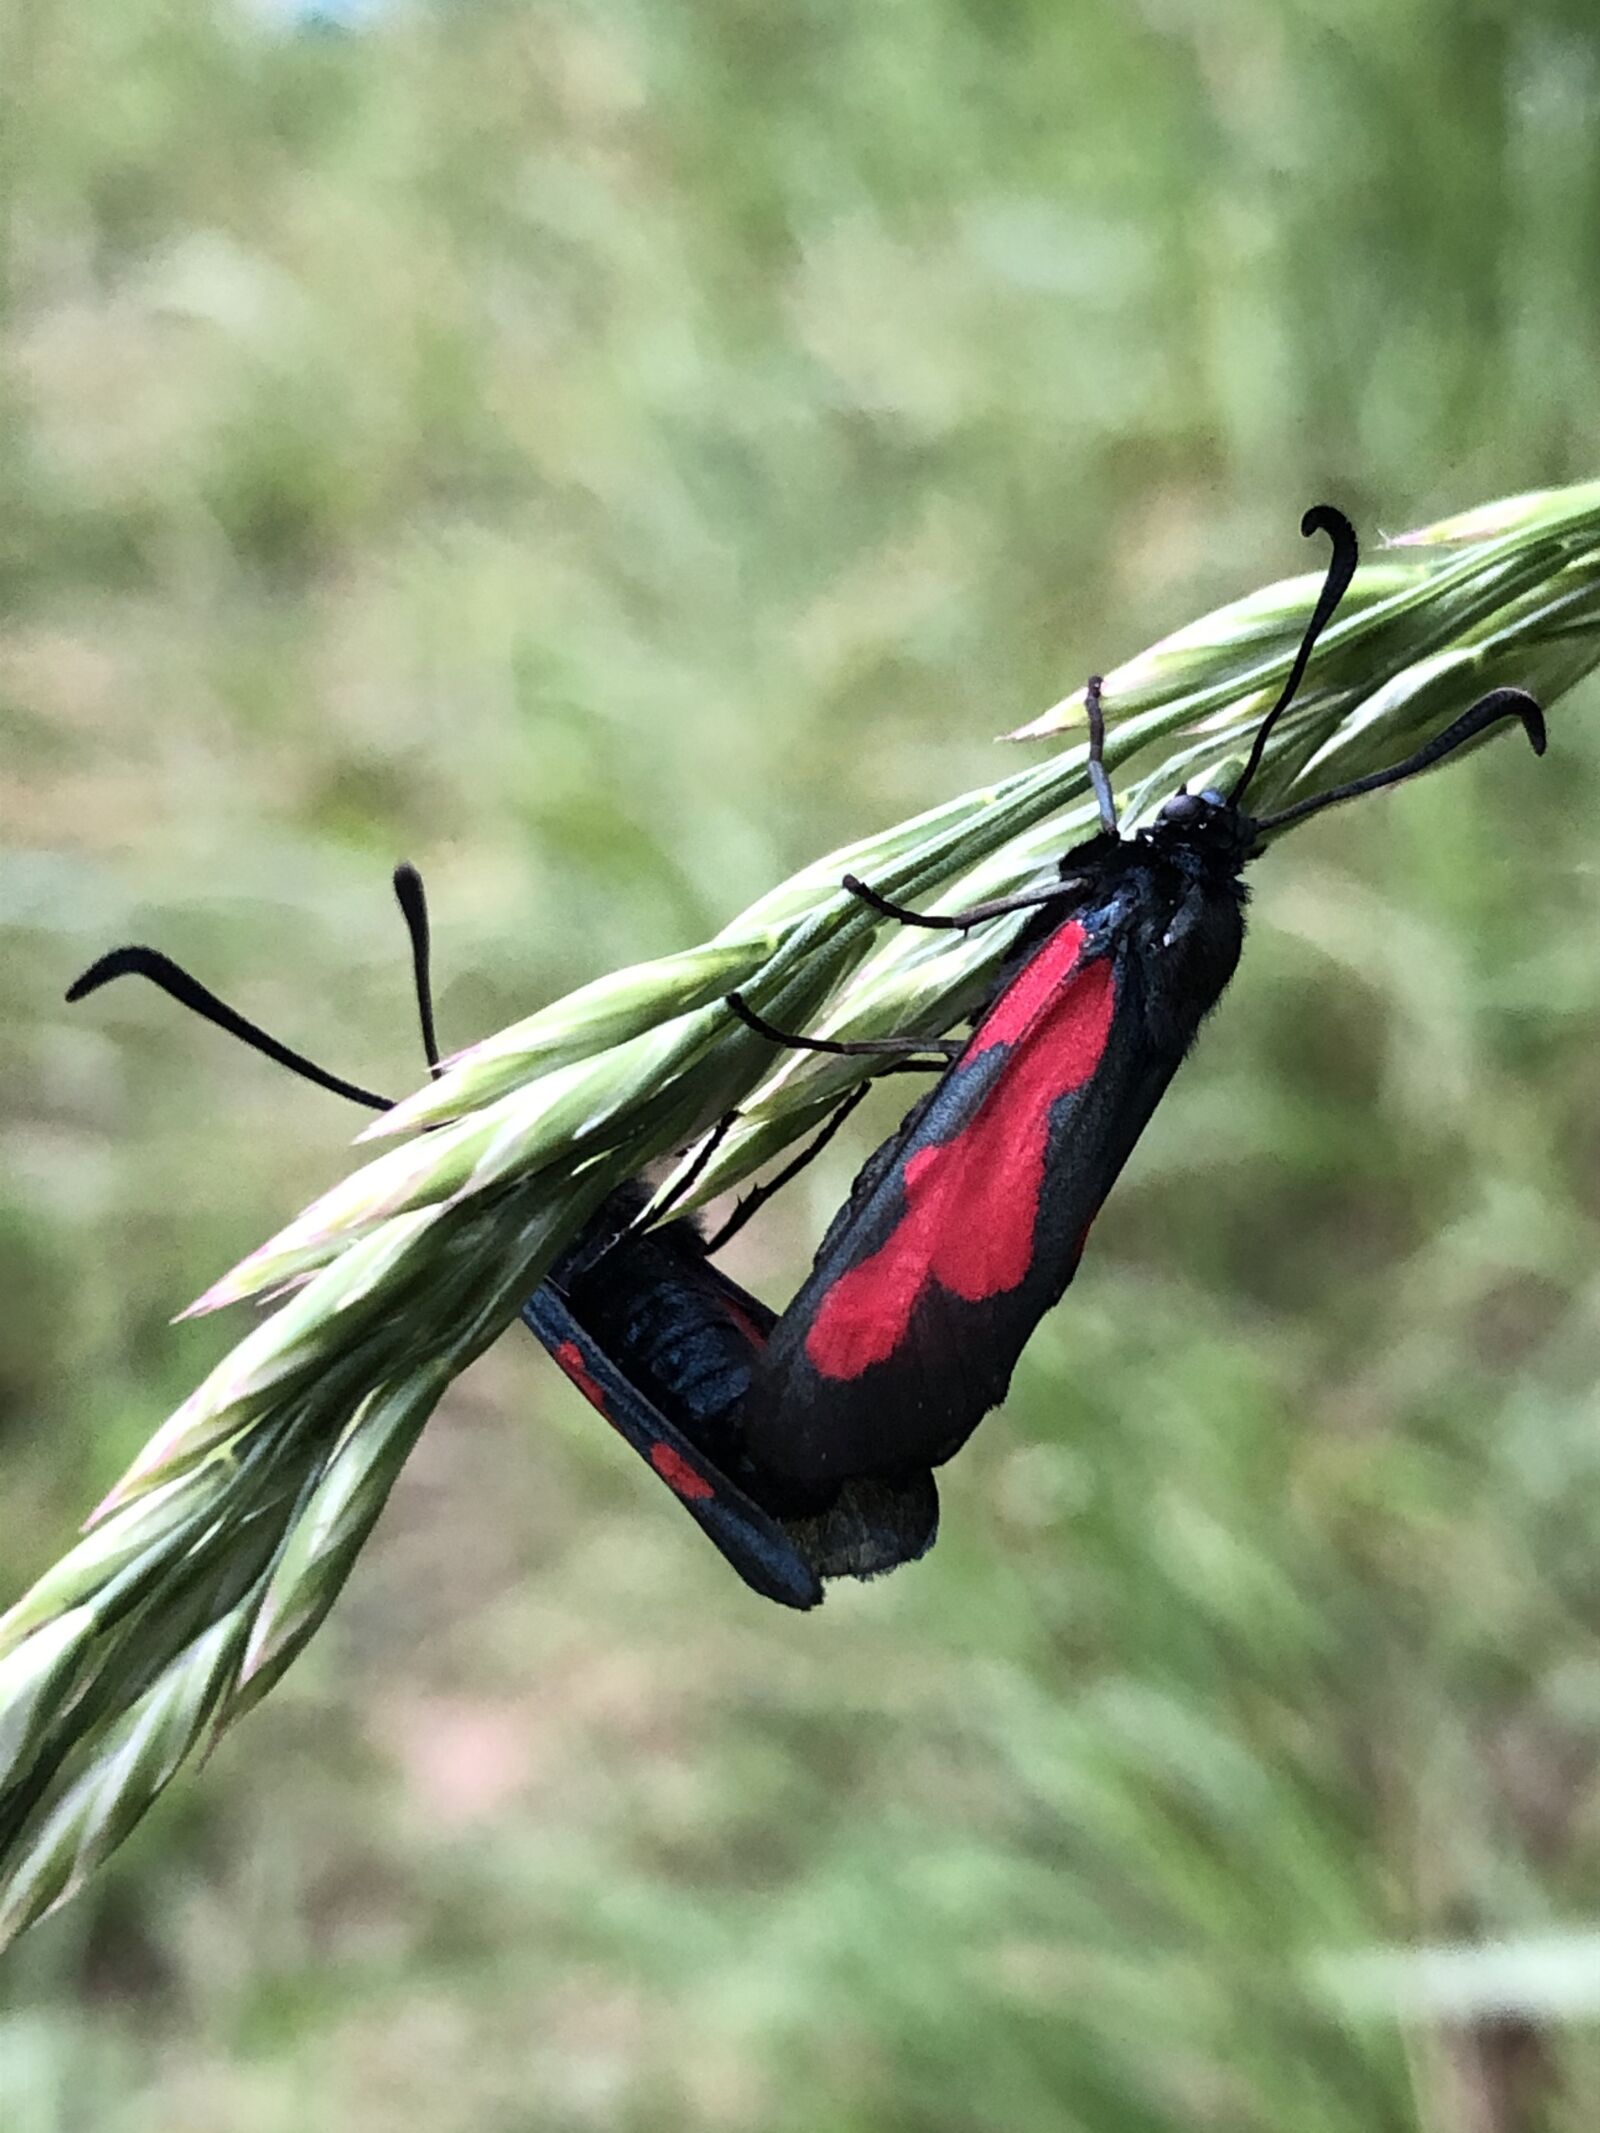 Apple iPhone 8 sample photo. Zygaena filipendulae, butterfly, insect photography